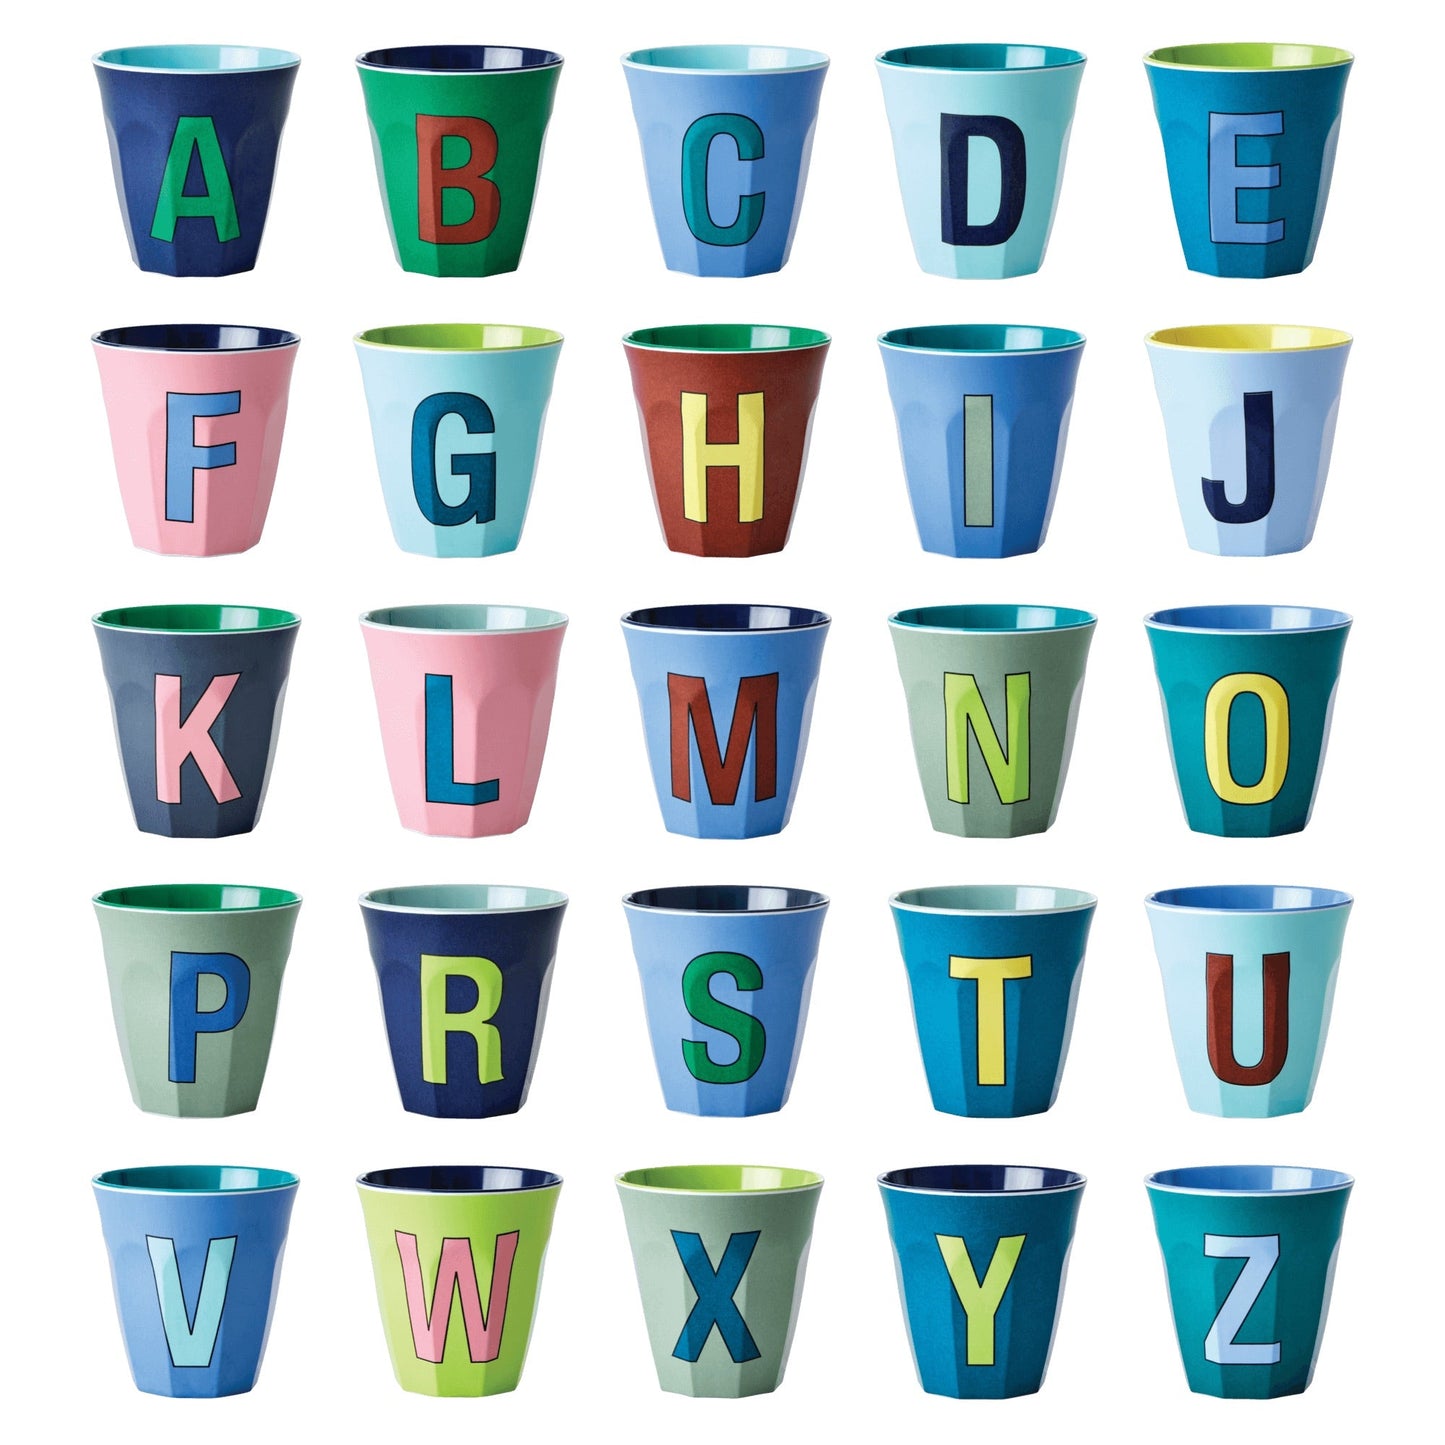 Melamine Cup - Medium with Alphabet in Bluish Colors | Letter E - Rice By Rice